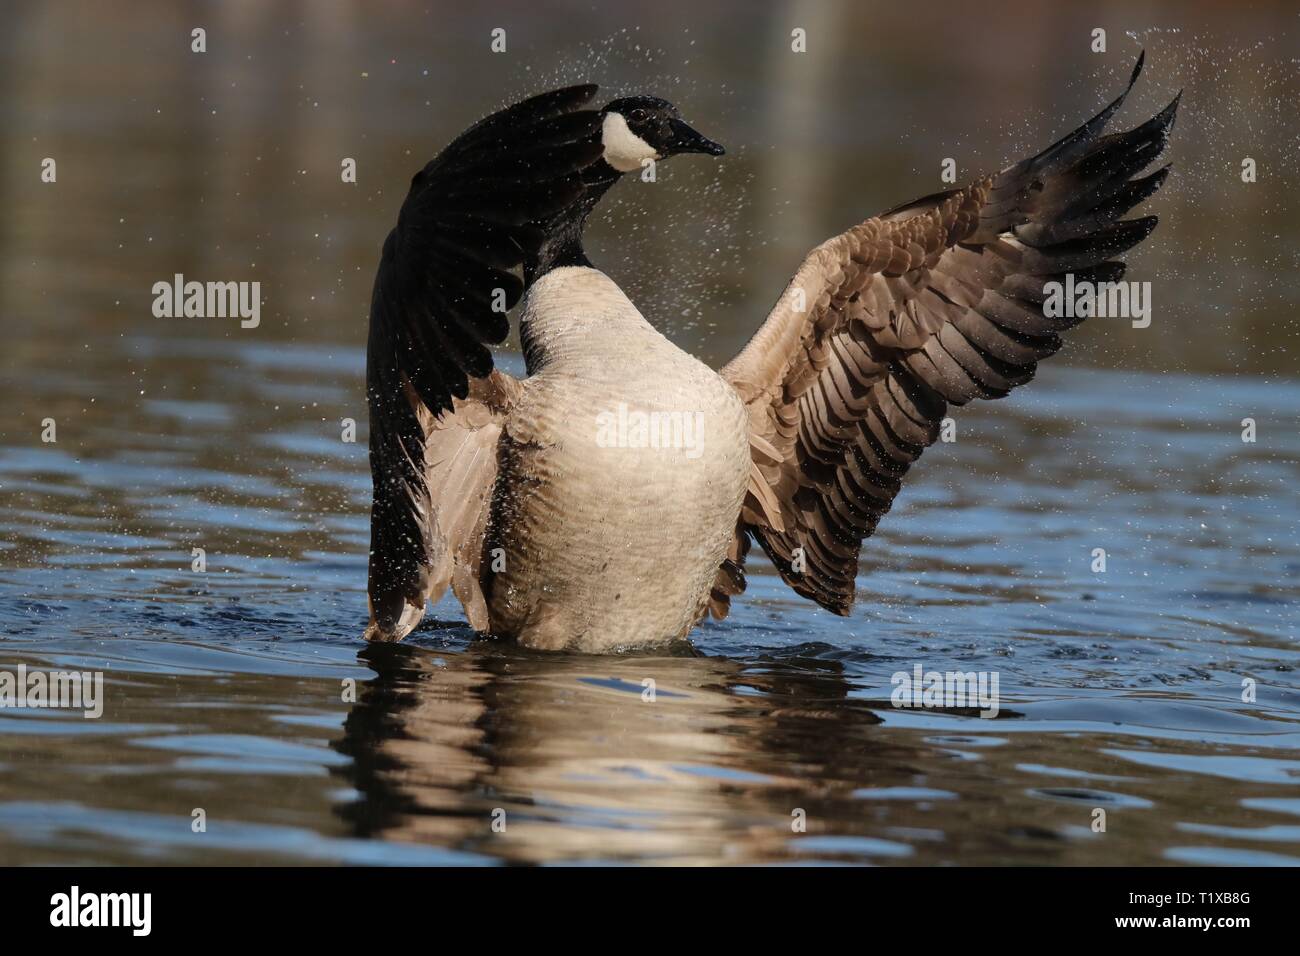 A Canada Goose Branta canadensis flapping and splashing on a pond Stock Photo